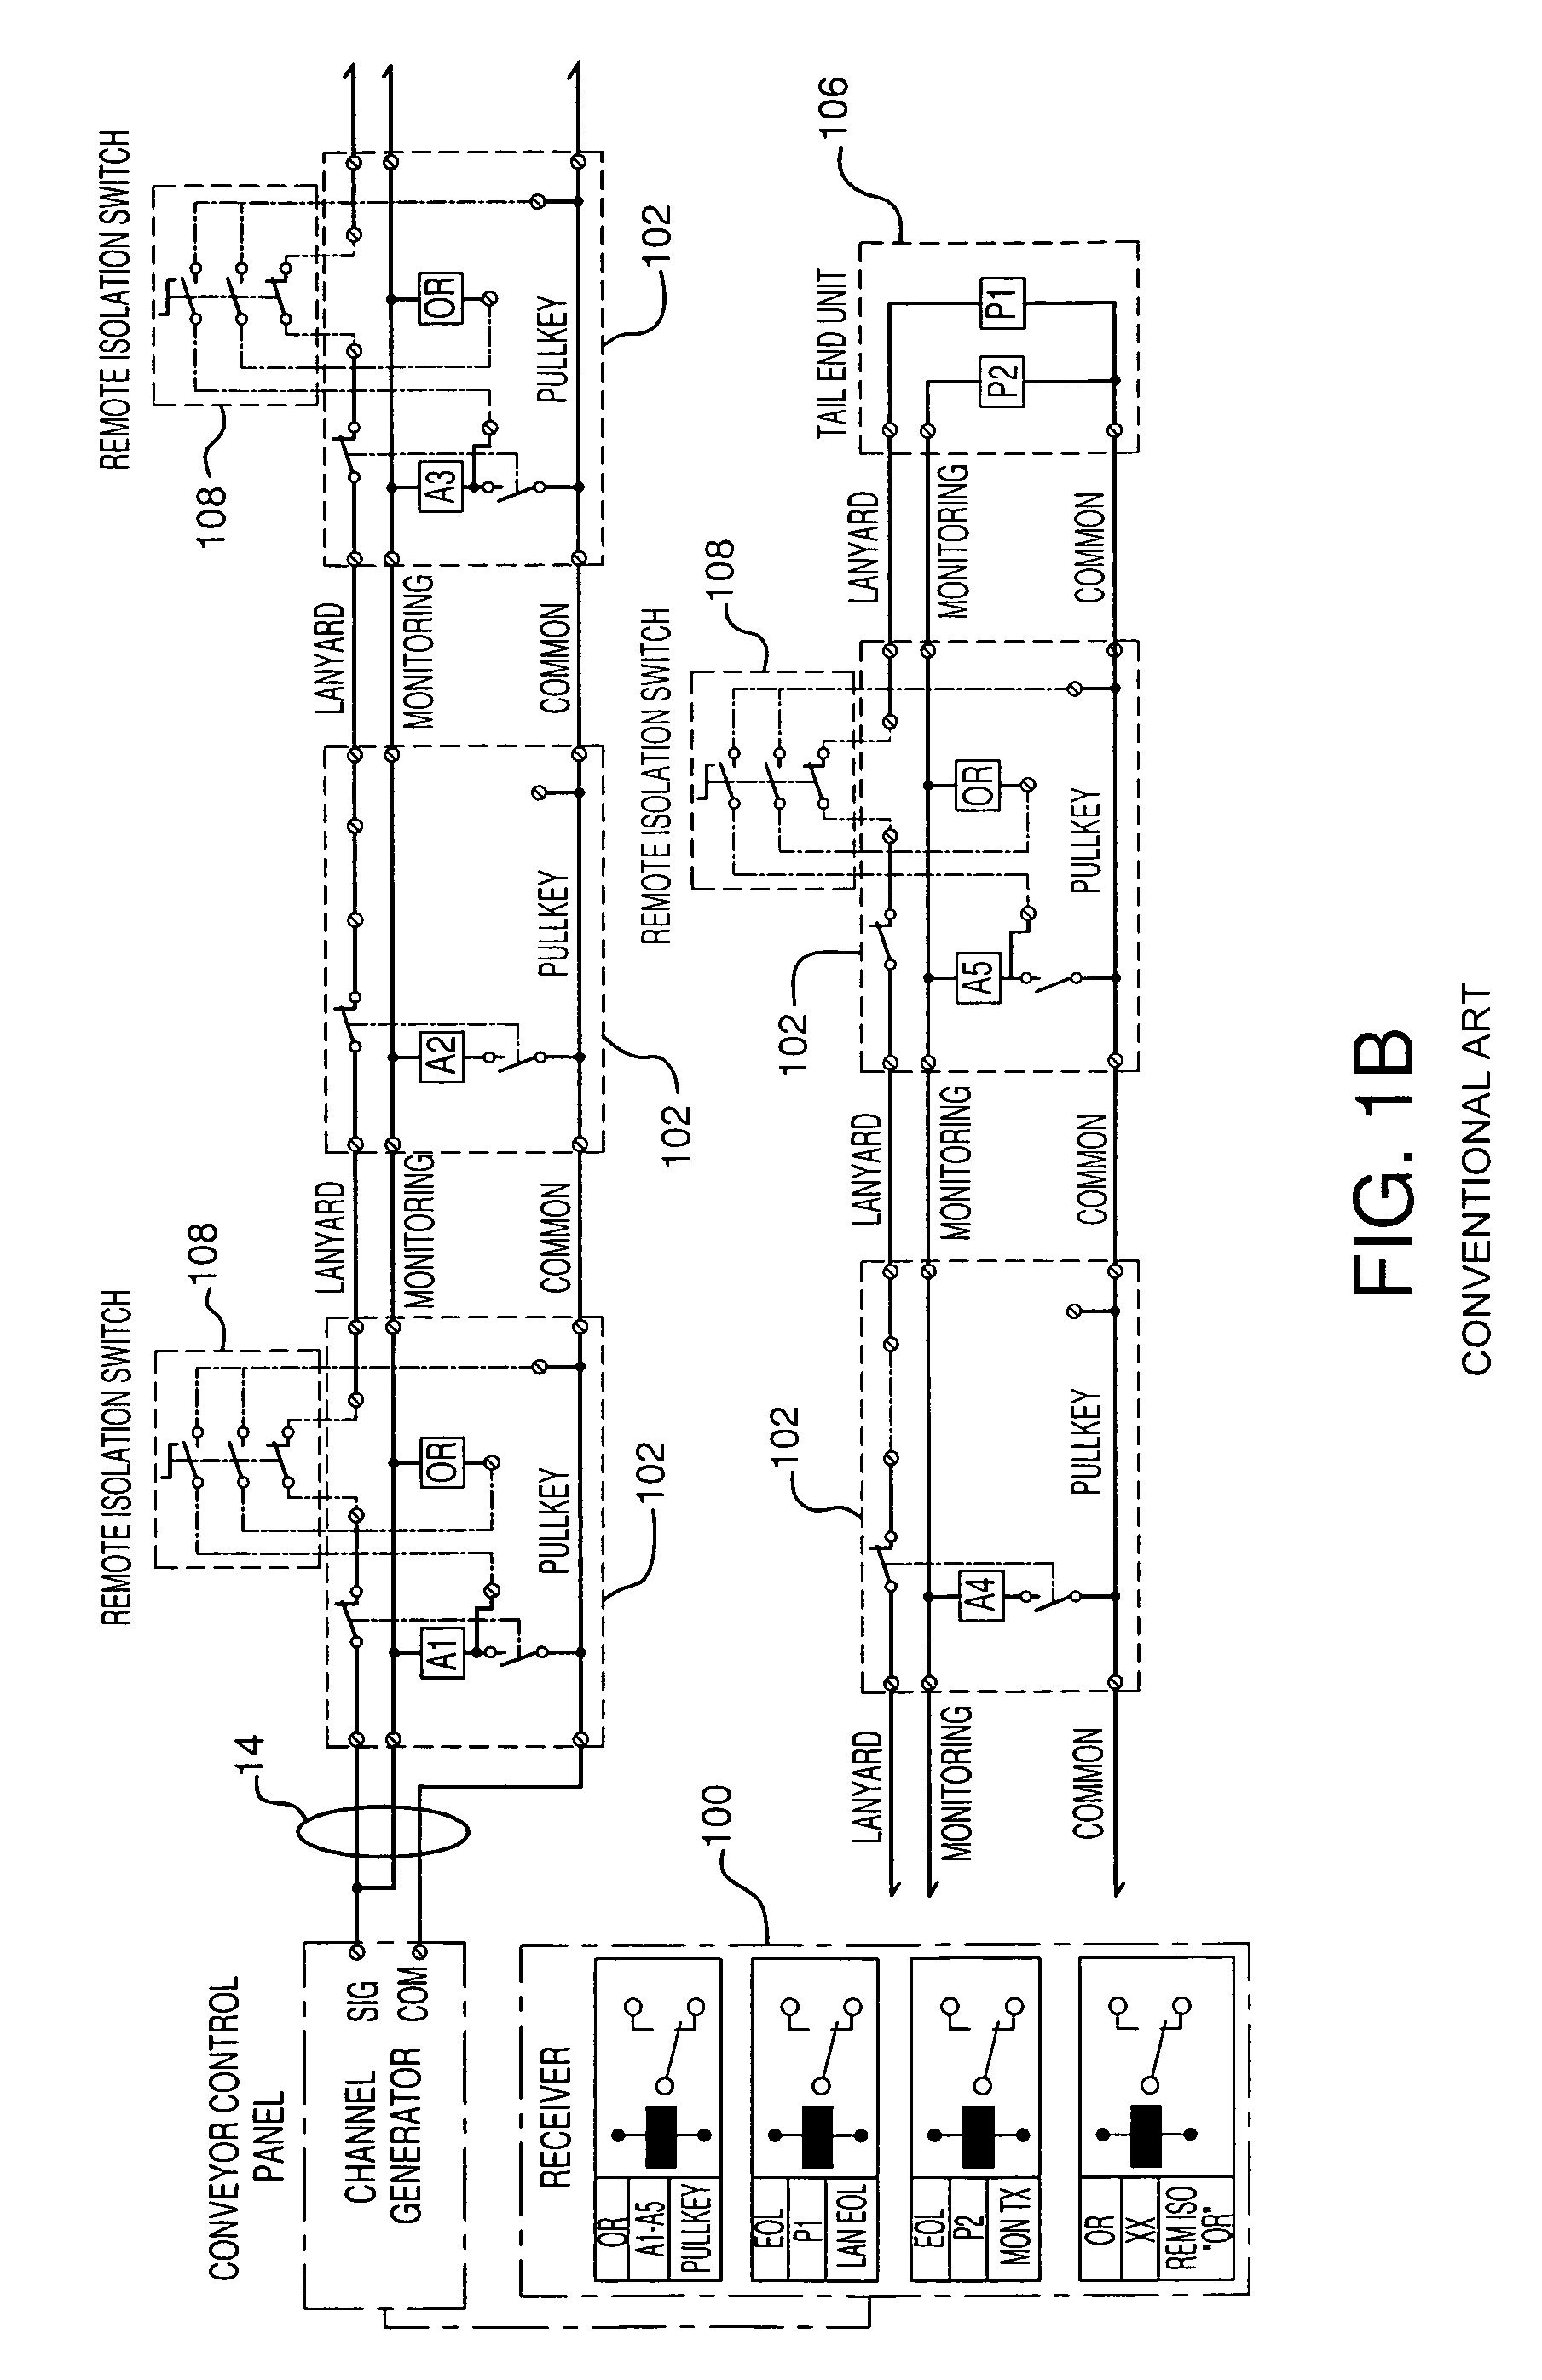 Lockout and monitoring system with SIL3 safety rating and method for lockout and monitoring